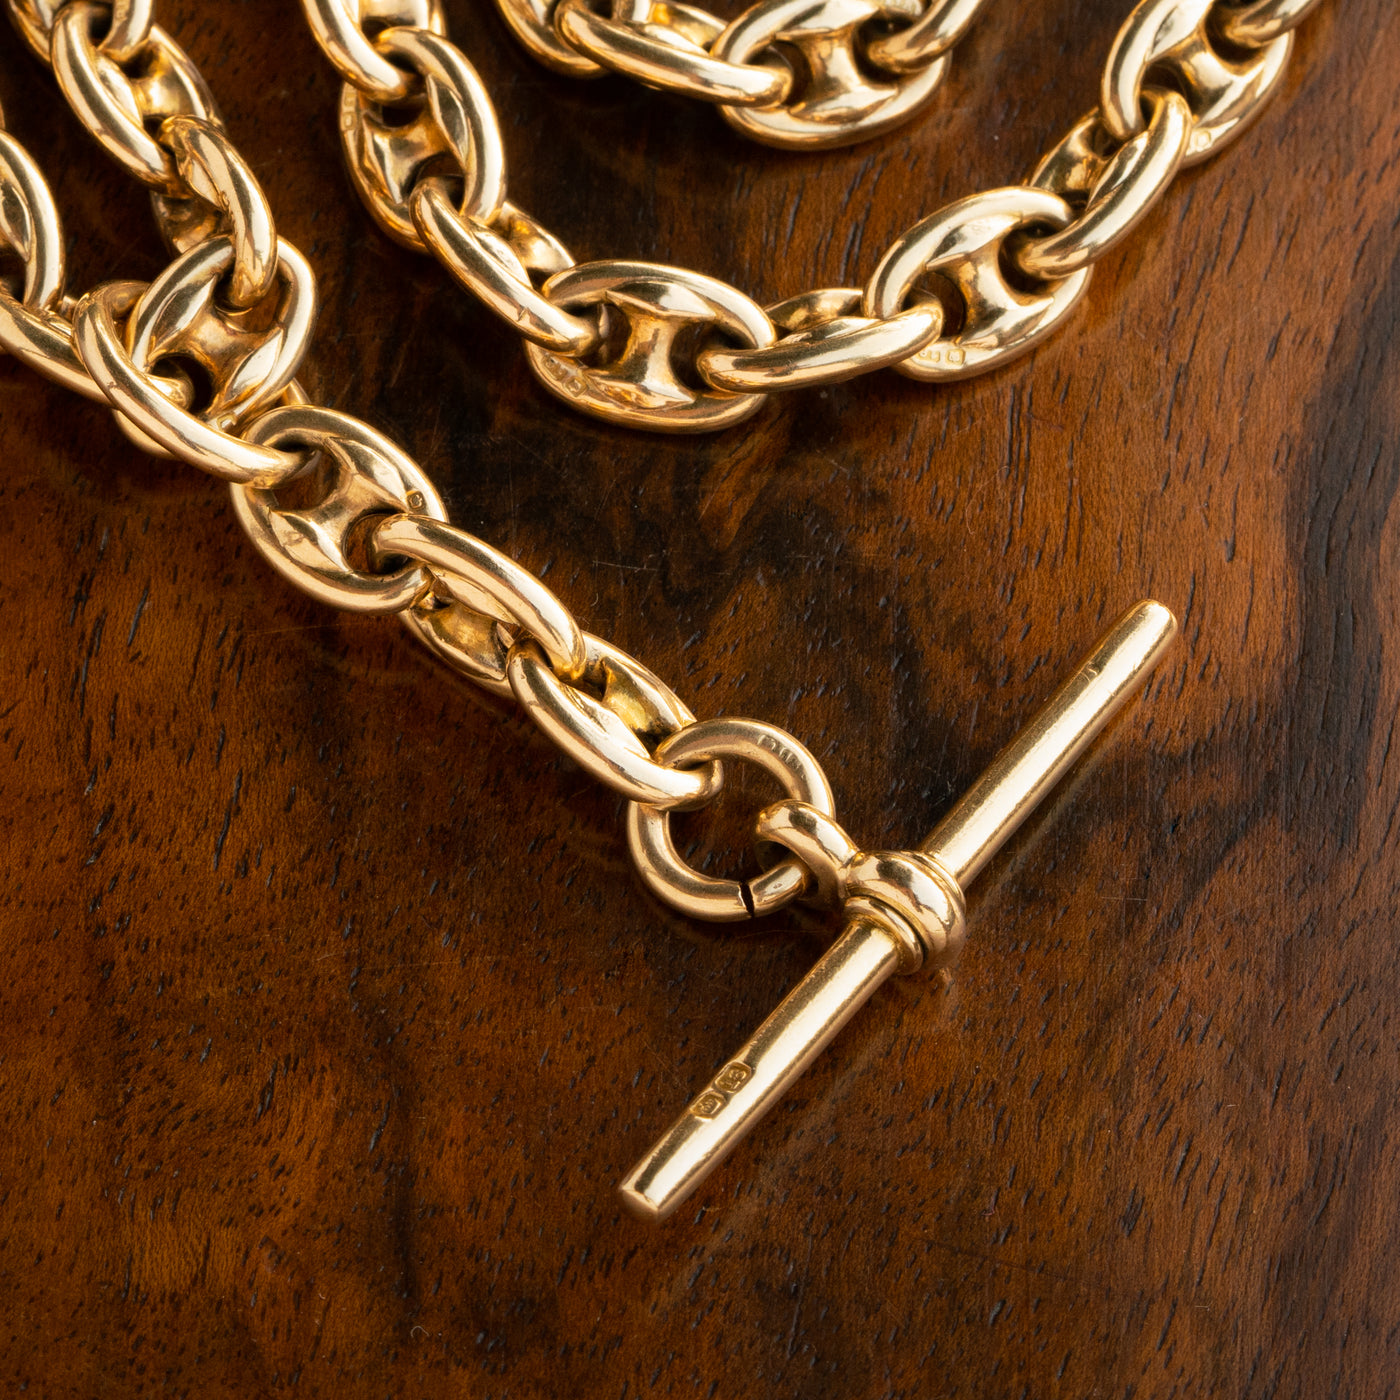 19TH CENTURY SOLID 18K YELLOW GOLD MARINE LINK WATCH CHAIN c.1880s